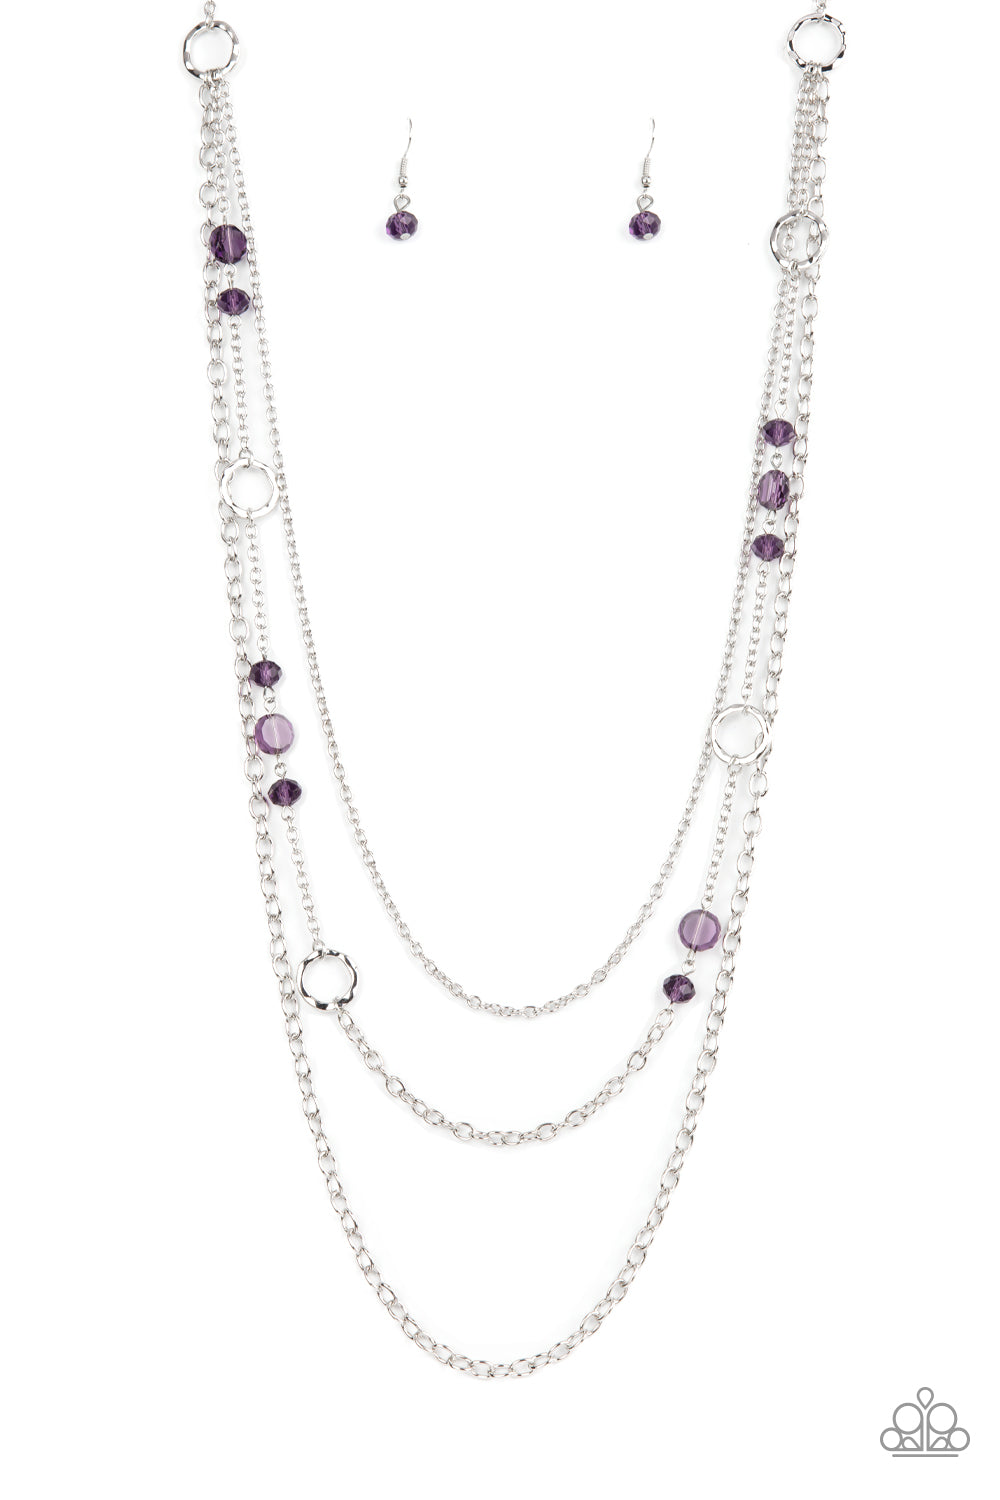 Starry-Eyed Eloquence - Glassy Purple Necklace - Paparazzi Accessories